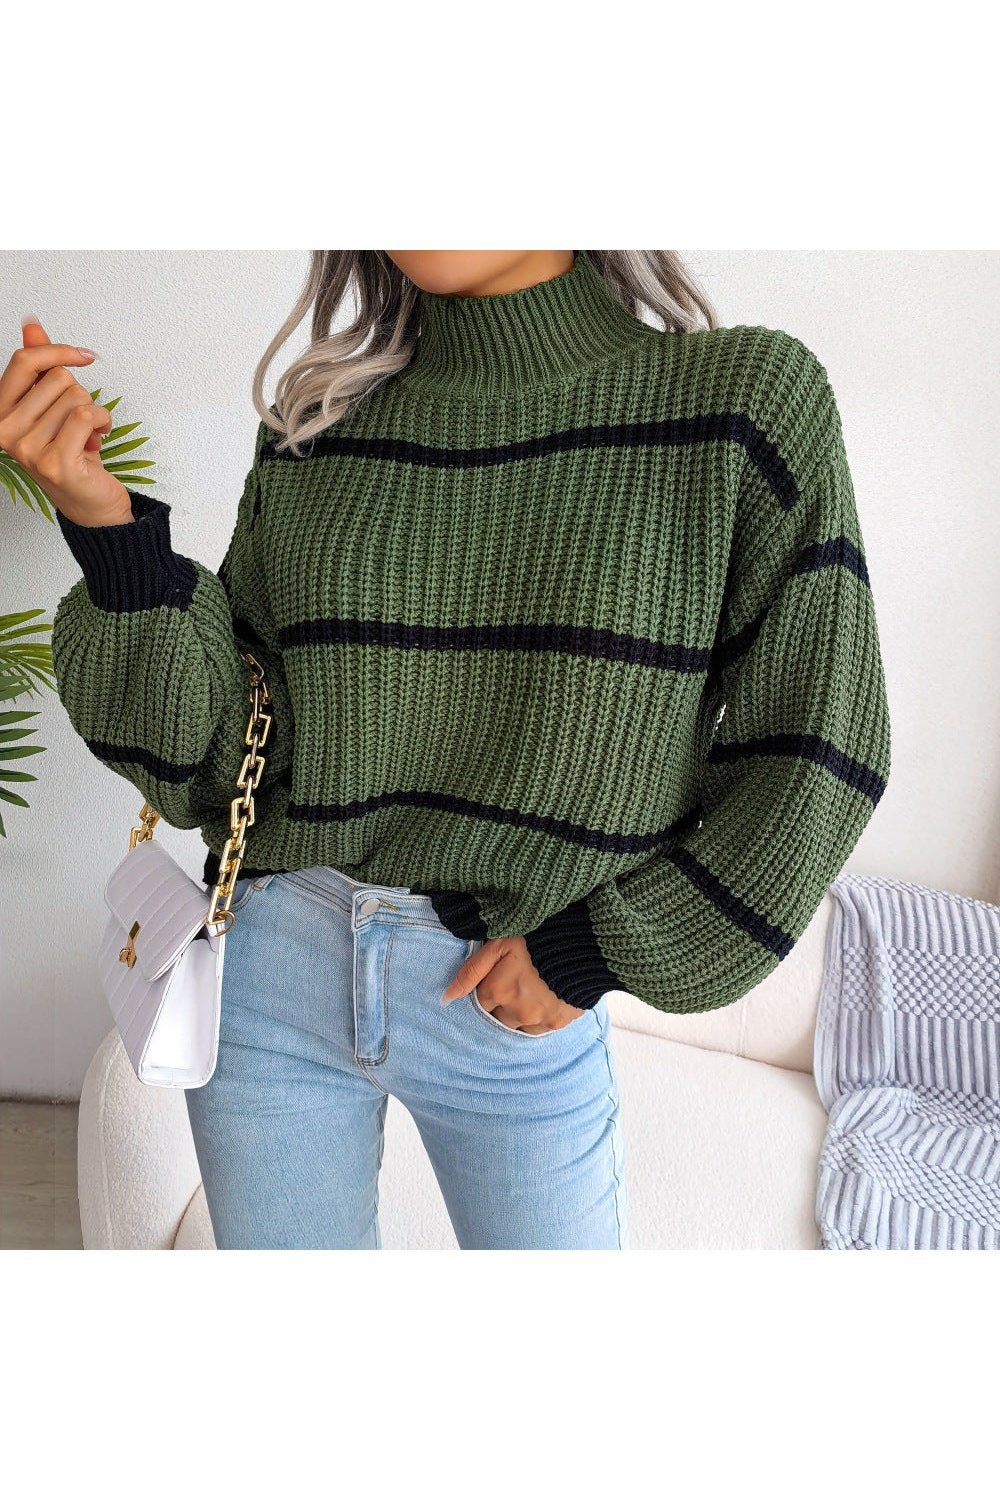 Striped High Neck Rib-Knit Lantern Sleeve Sweater - Pullover Sweaters - FITGGINS